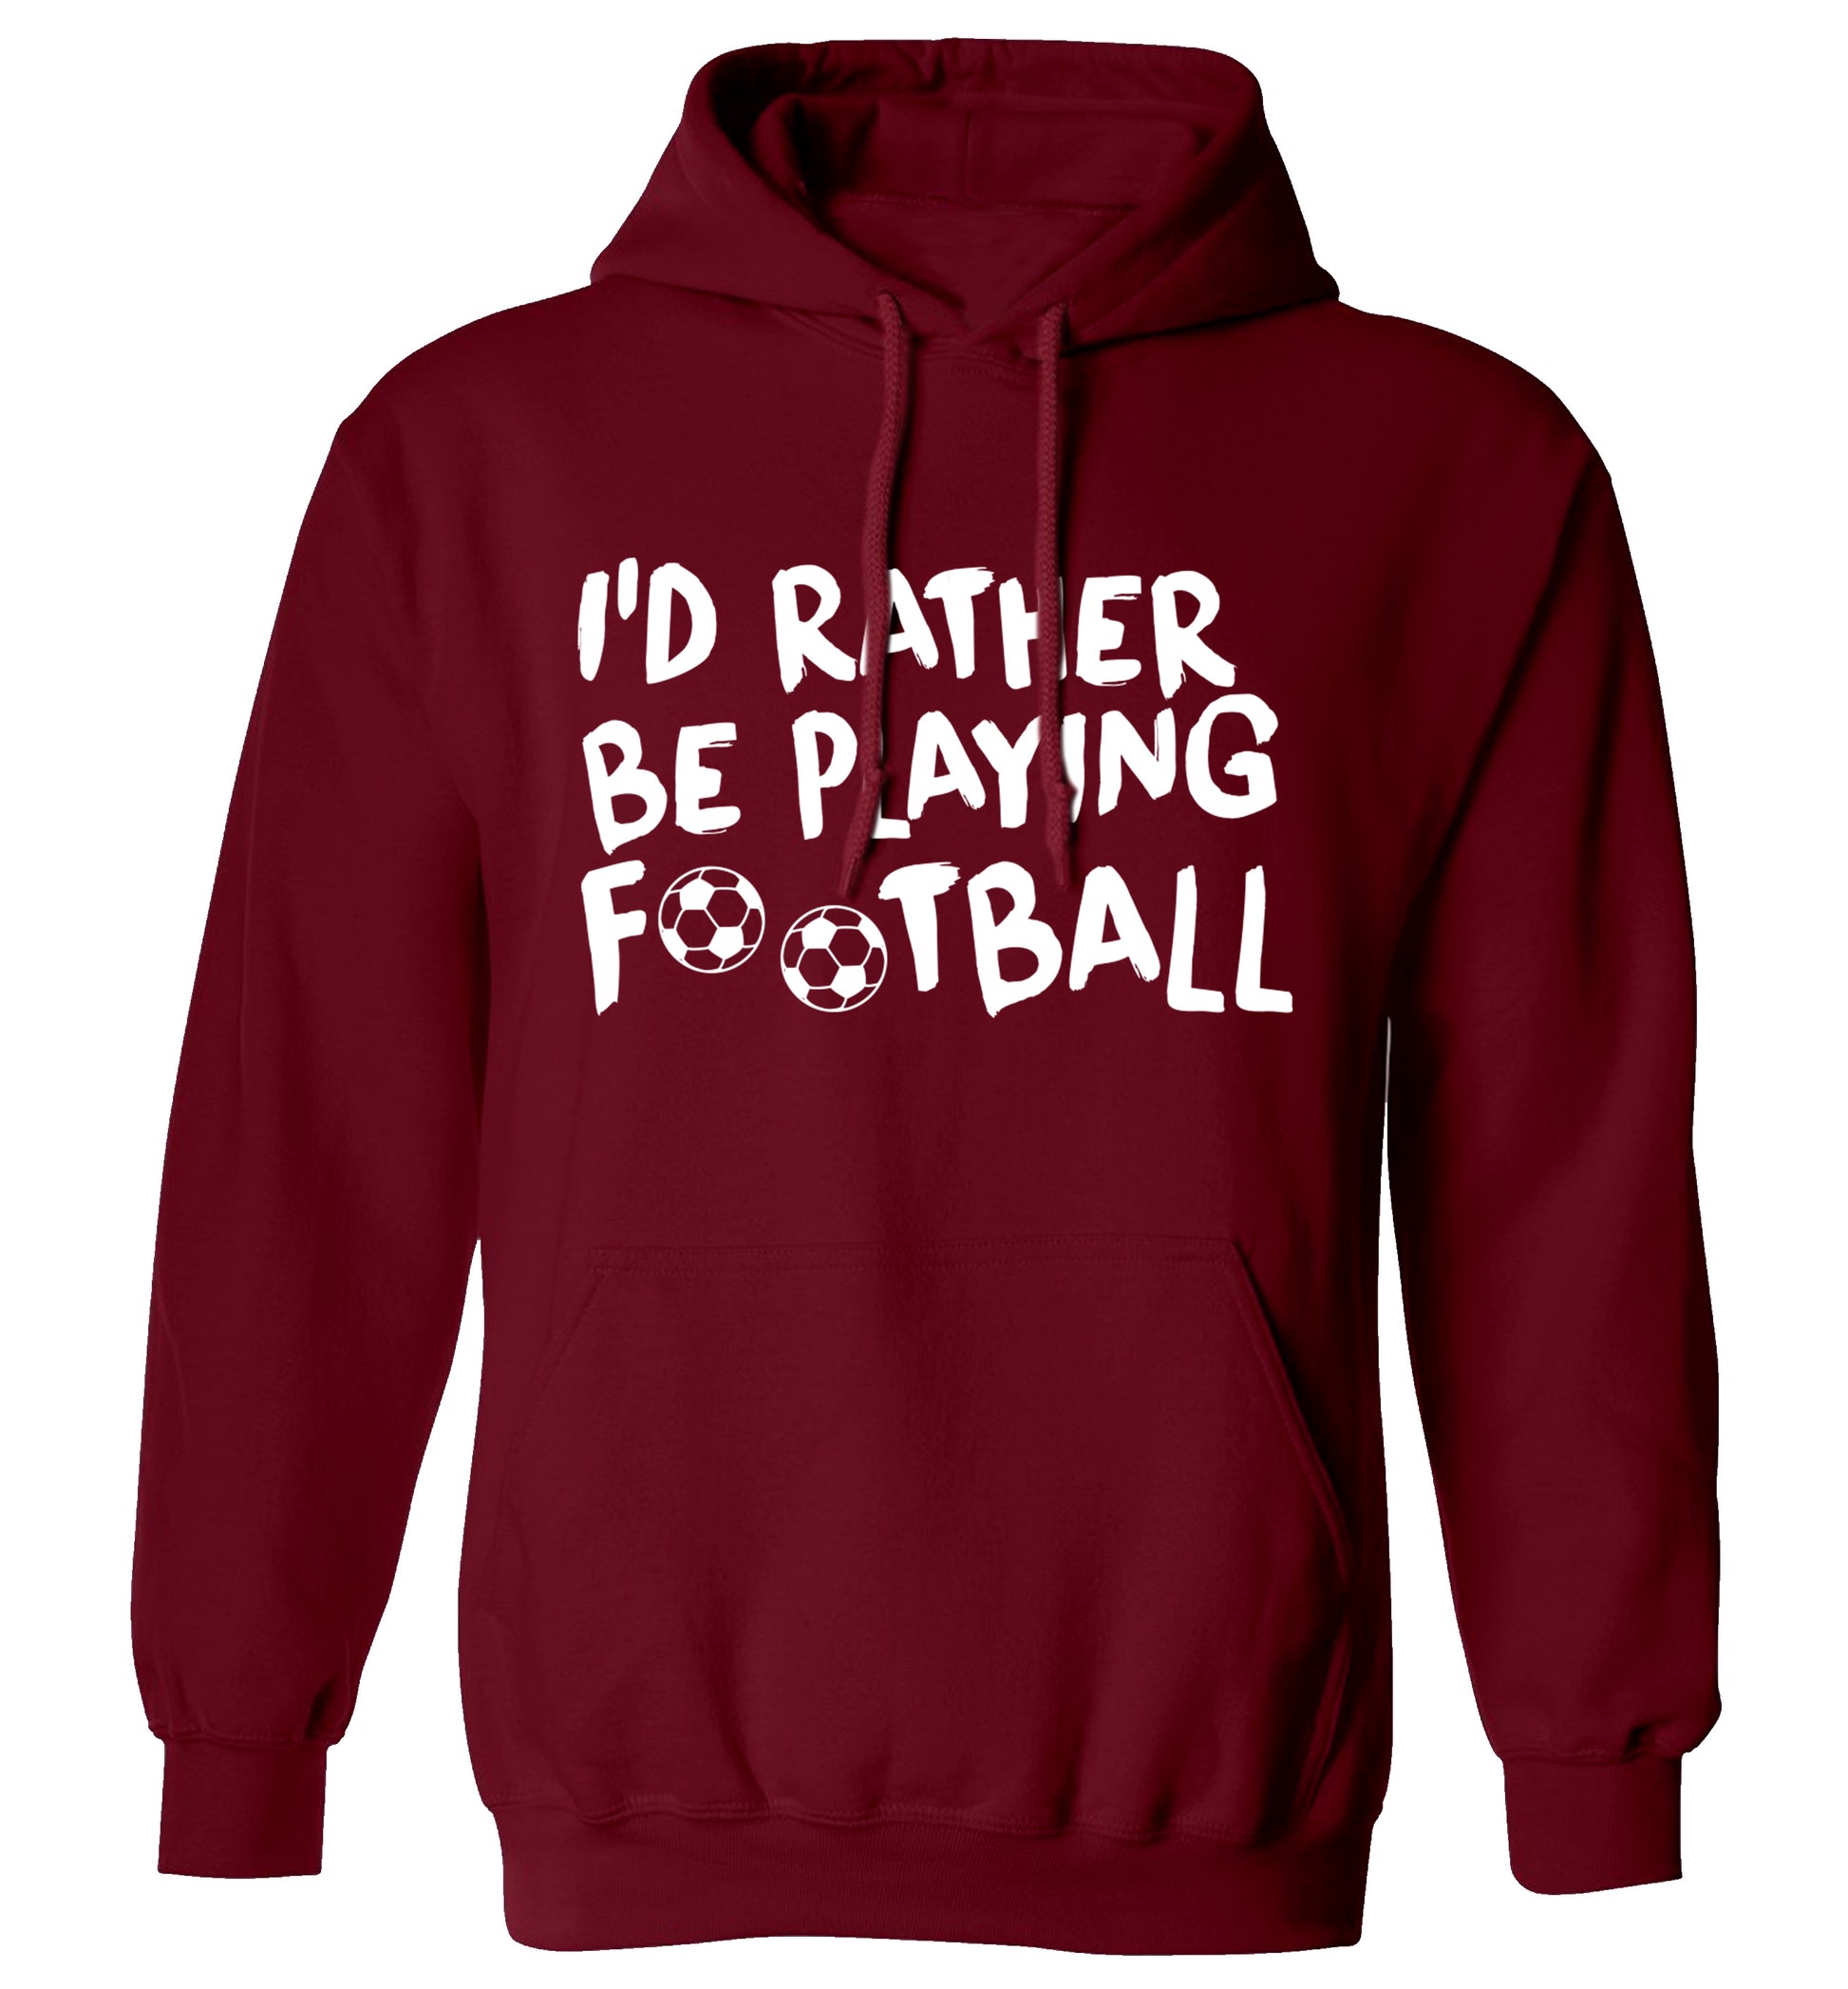 I'd rather be playing football adults unisexmaroon hoodie 2XL